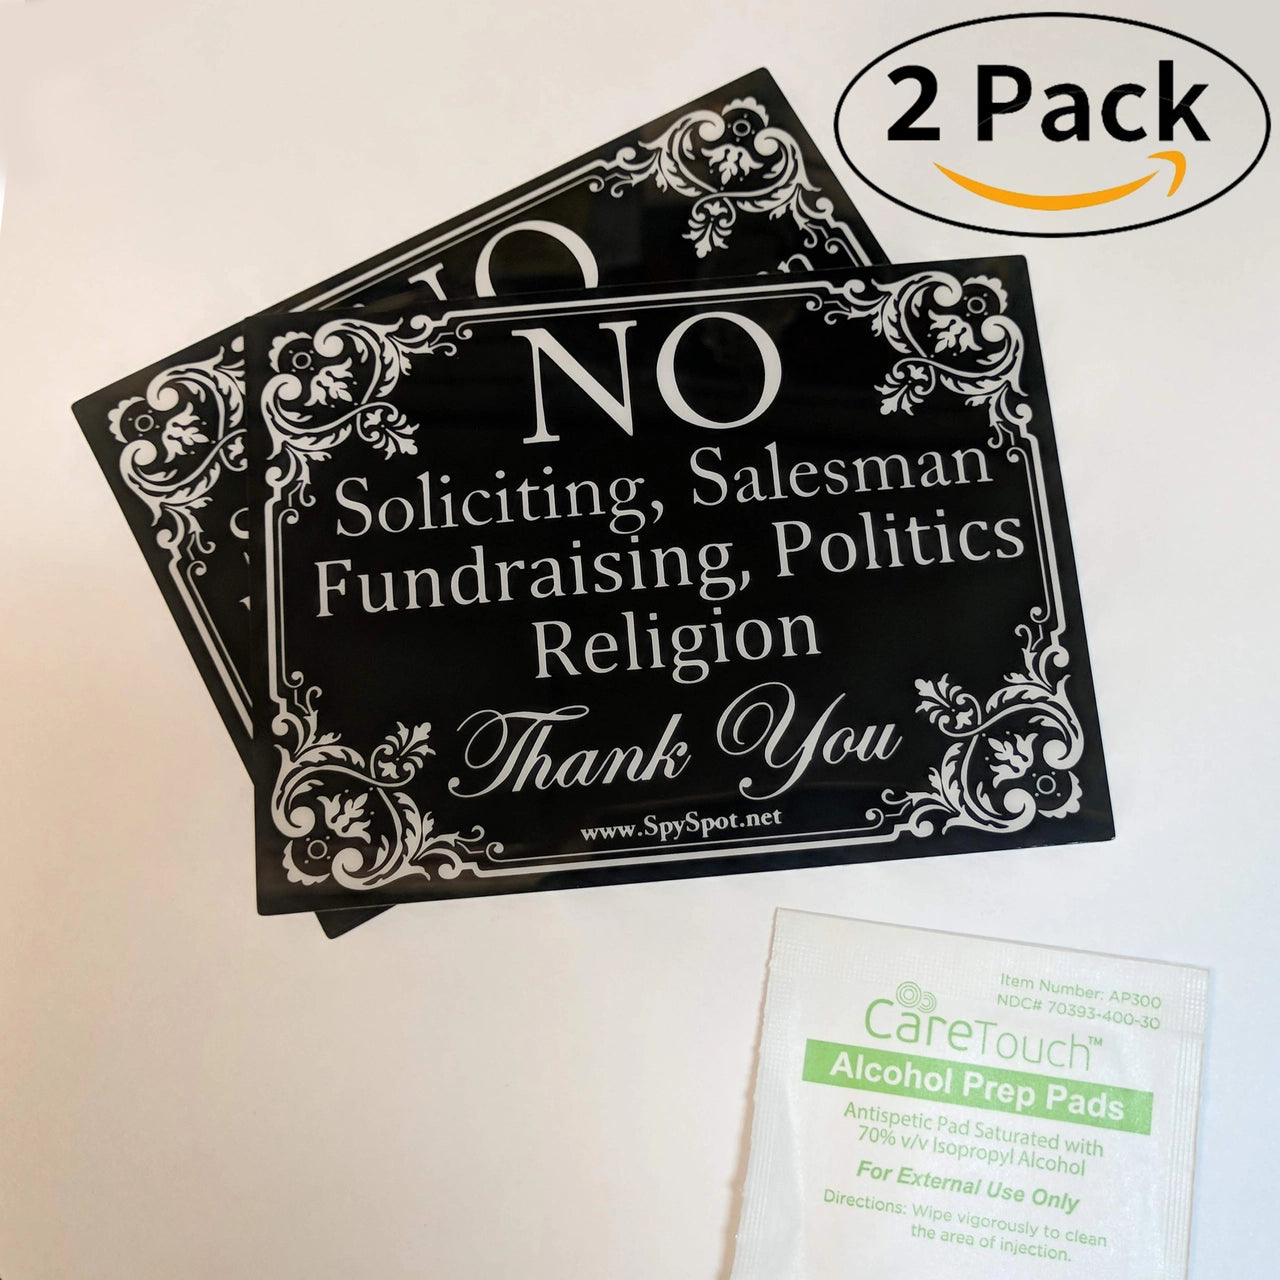 2 Pack of No Soliciting Vinyl Decal Stickers 4" x 3" Indoor and Outdoor Use UV Stable Home and Business Sticker